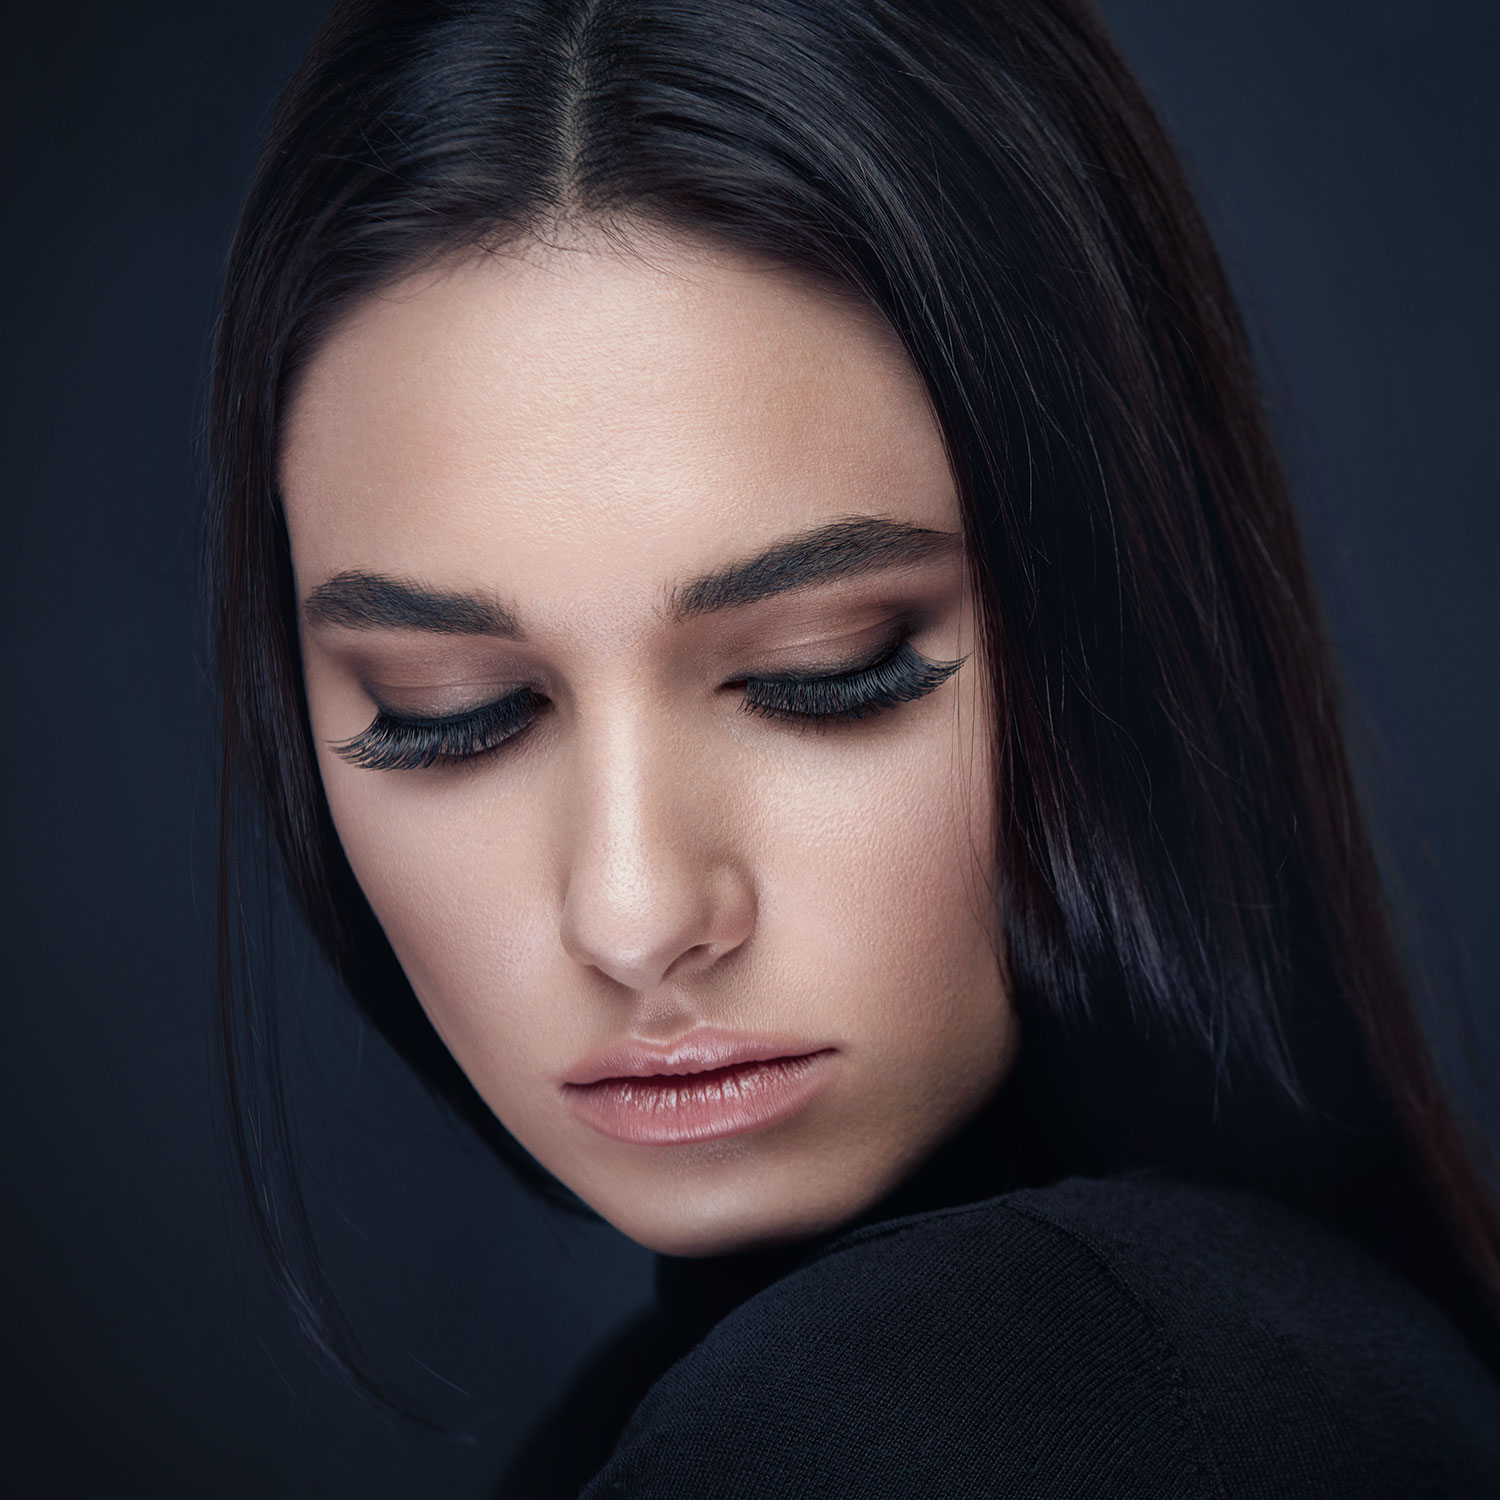 Thick, black hair and sculpted eyebrows frame beautiful, thick eyelashes. The woman is pictured on a dark background wearing a black shirt and has natural makeup and bronzed skin.